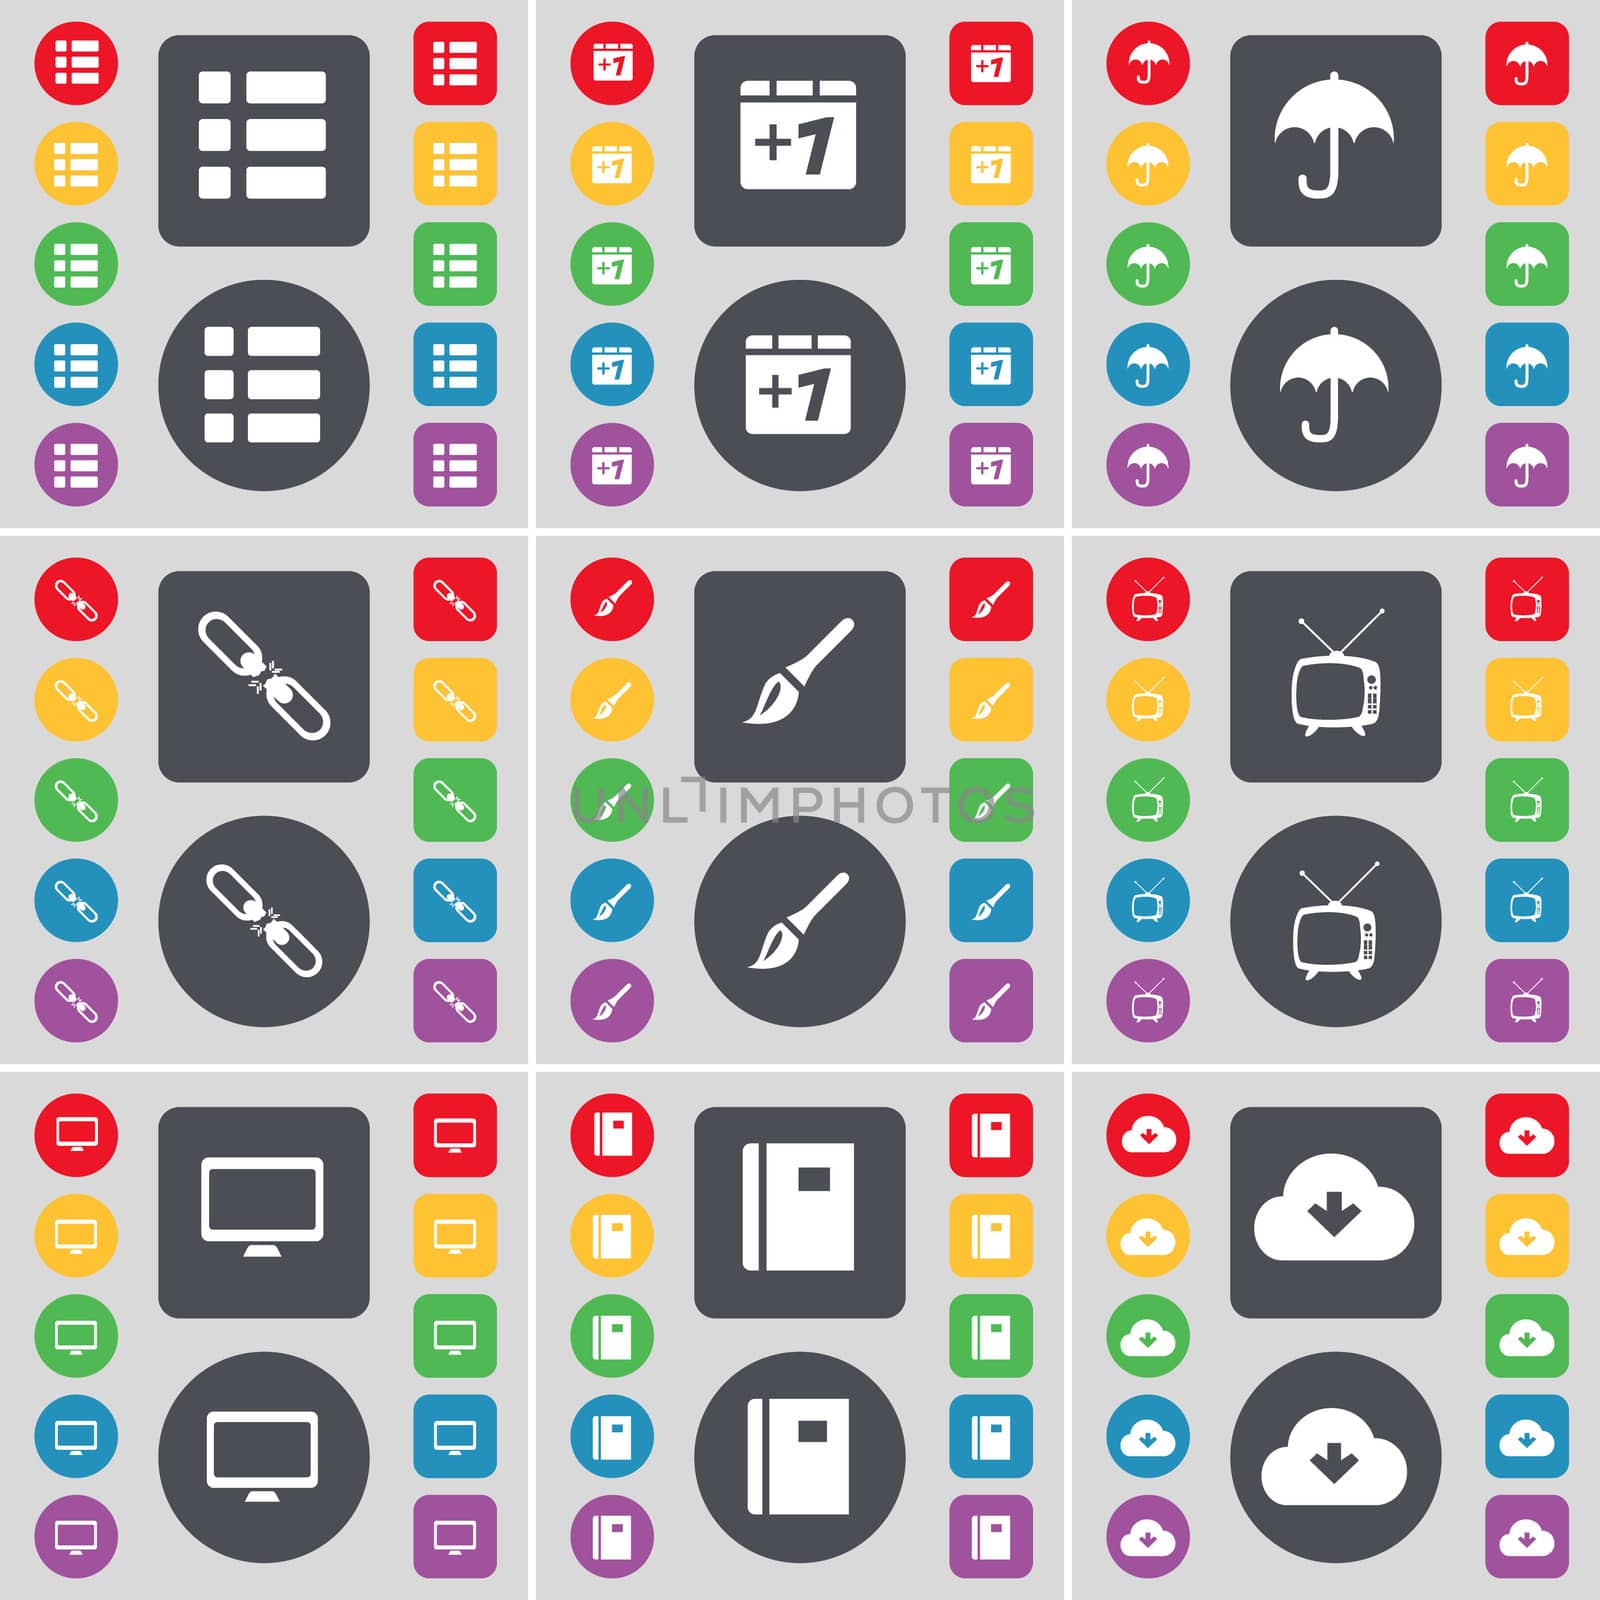 List, Plus one, Umbrella, Link, Brush, Retro TV, Monitor, Notebook, Cloud icon symbol. A large set of flat, colored buttons for your design.  by serhii_lohvyniuk